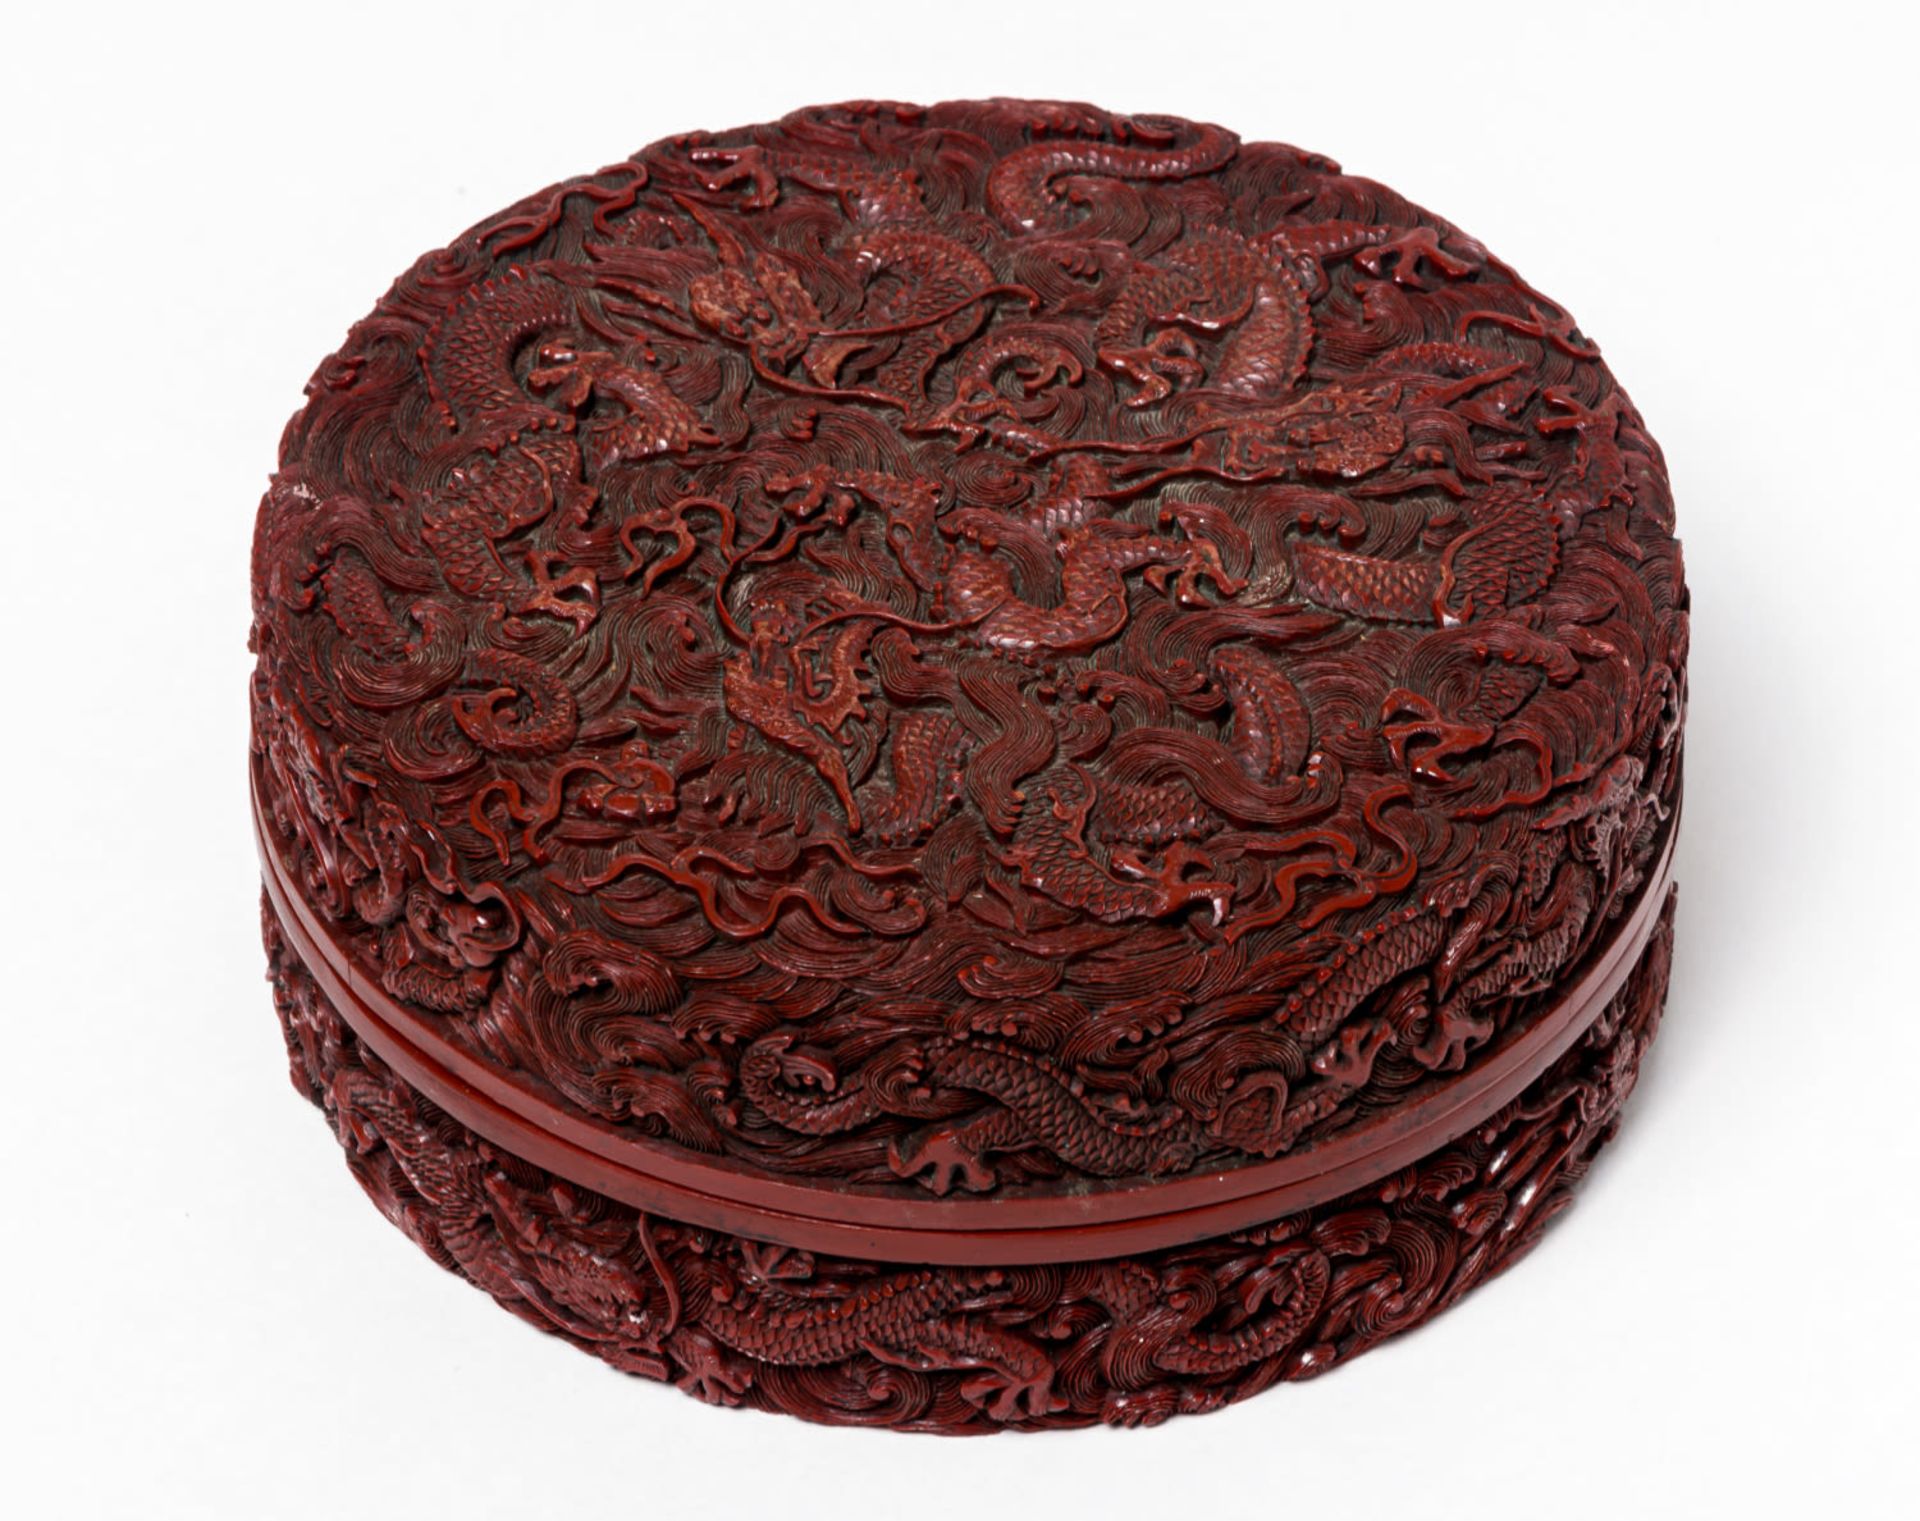 A CHINESE WOOD CARVED CINNABAR LACQUER BOX WITH 9 DRAGONS AND CH'IEN LUNG MARK - Image 2 of 3